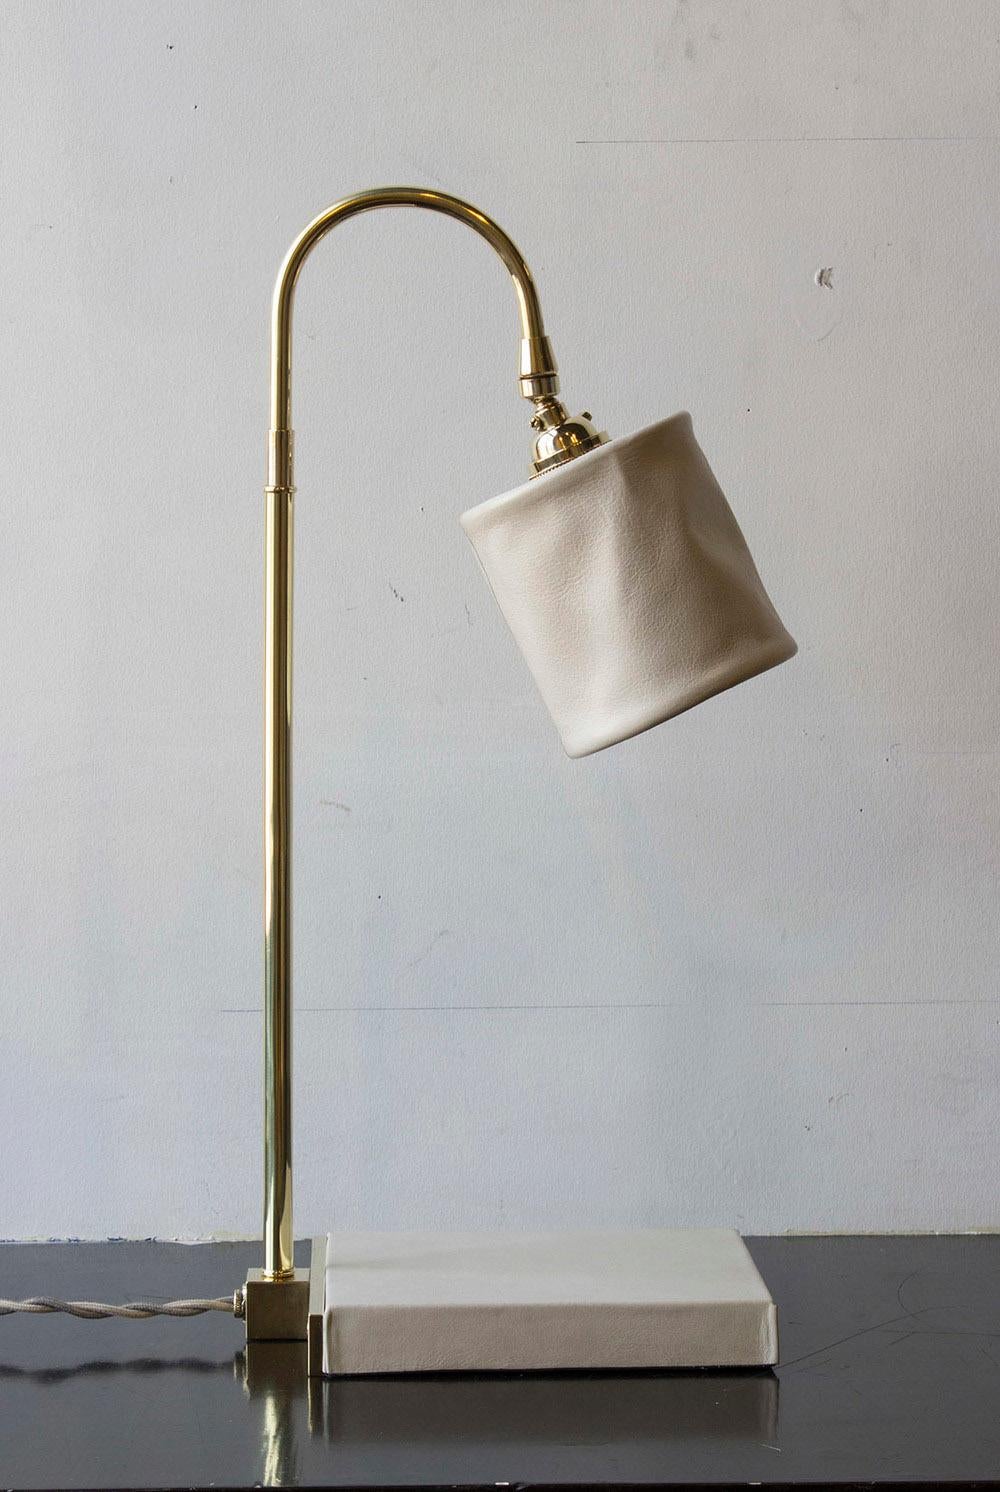 Series01 Desk Lamp, Hand-Dyed Blush 'Pink' Leather, Polished Nickel-Plated Brass For Sale 6